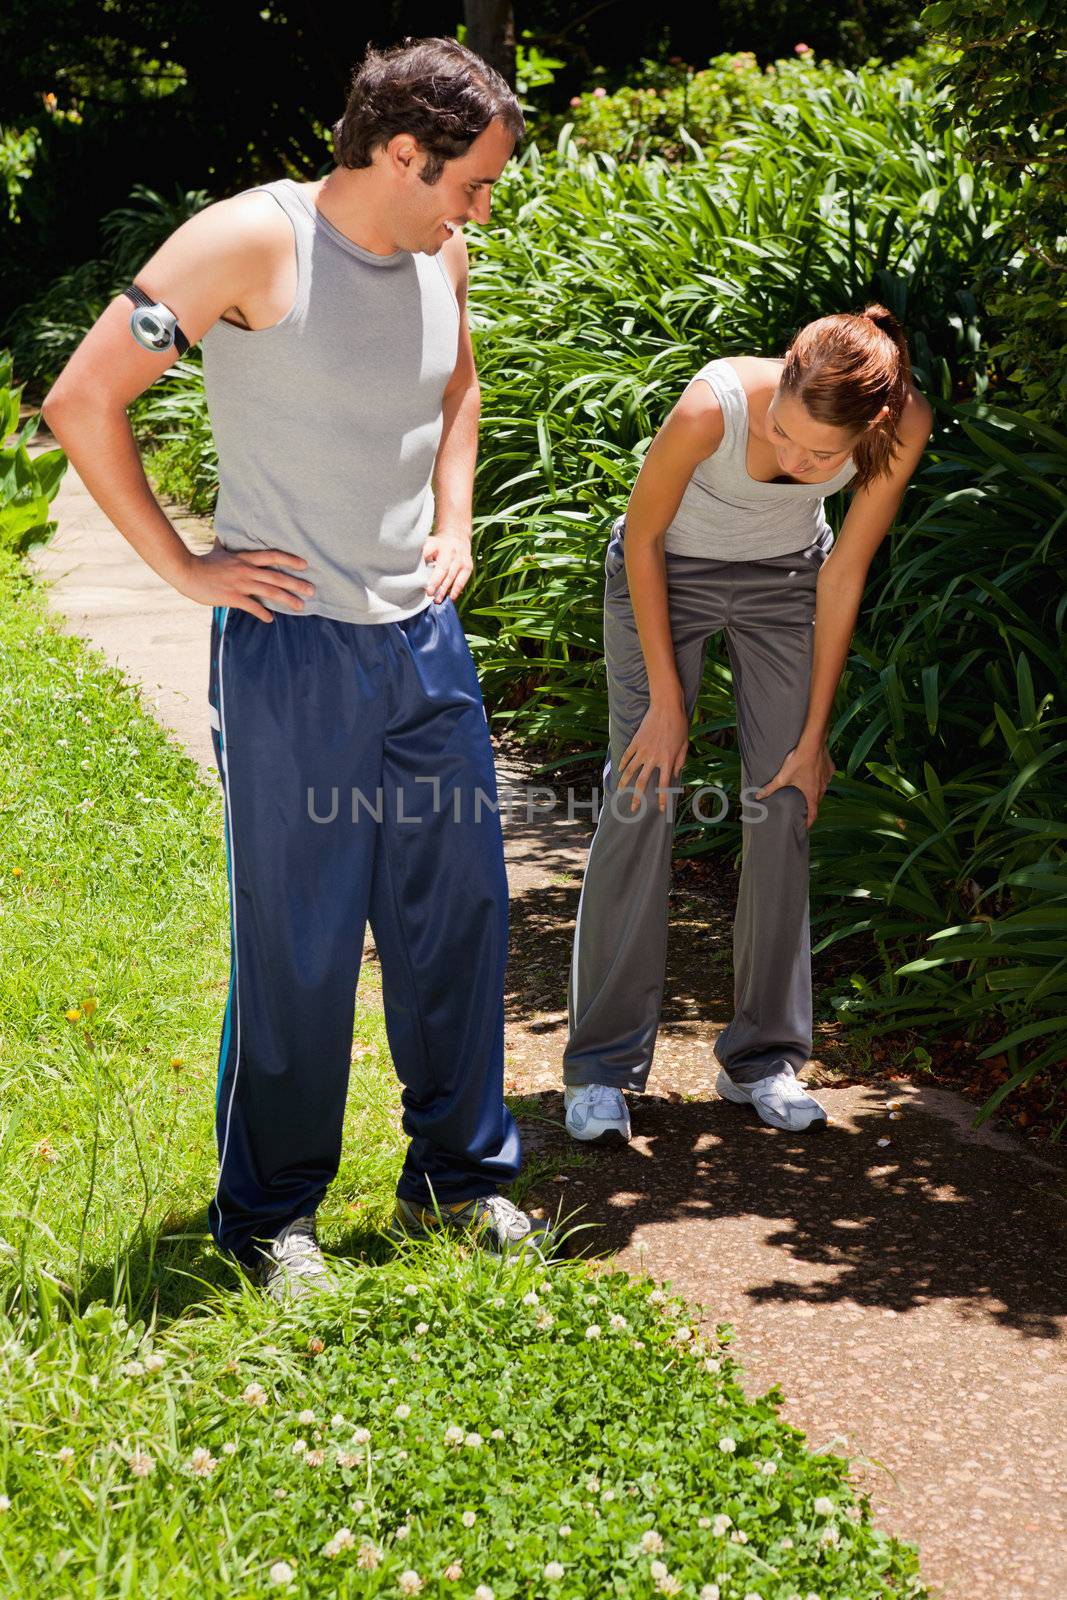 Man wearing a pedometer watching a woman as she is bent over while recovering next to bushes